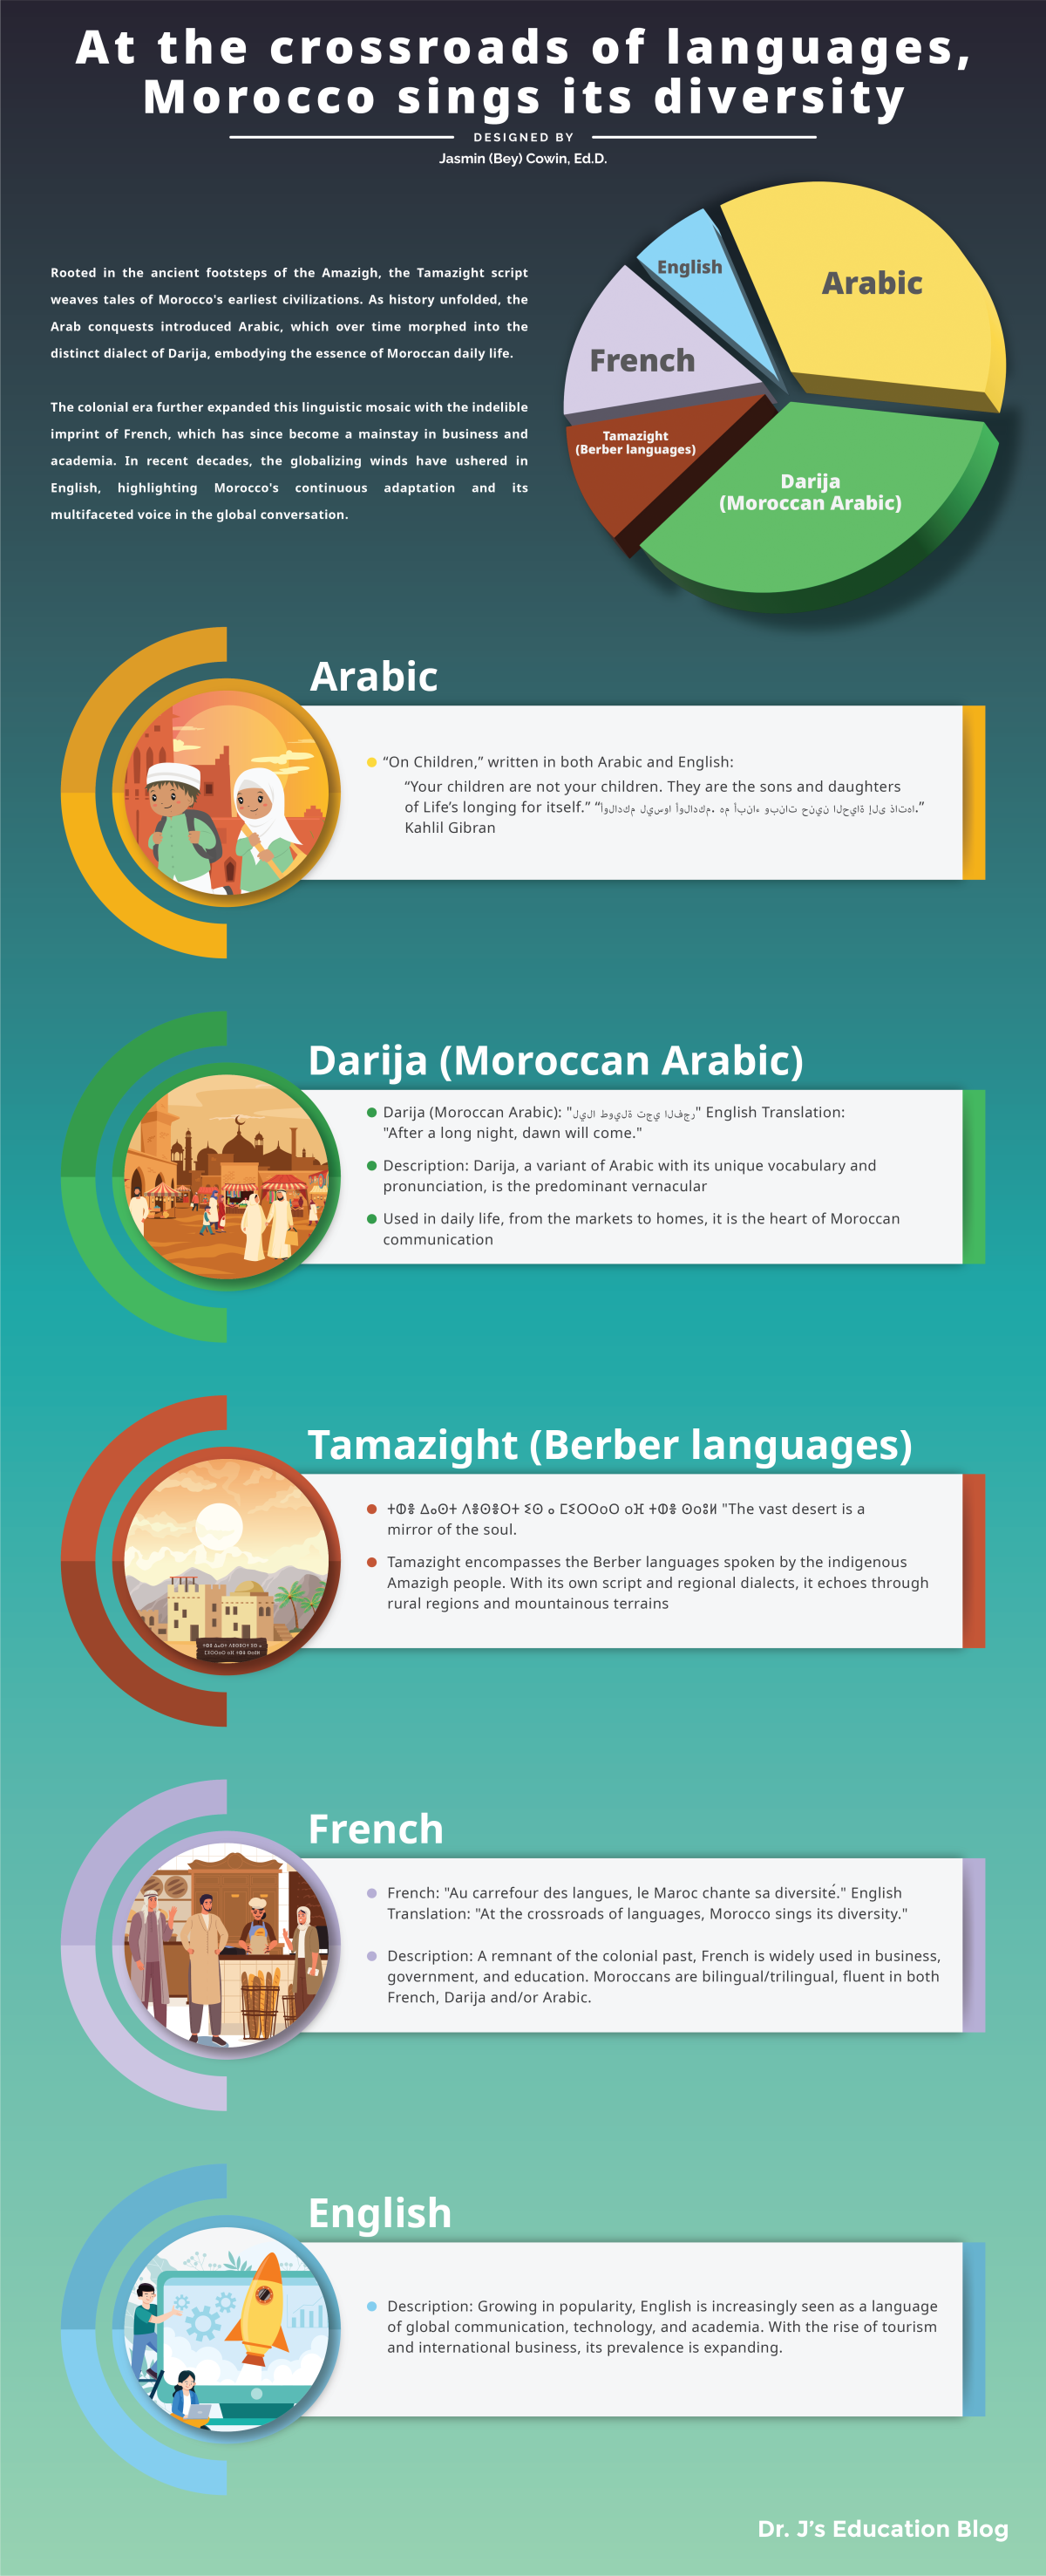 “At the Crossroads of Languages, Morocco sings its Diversity” Infographic by Dr. Jasmin (Bey) Cowin